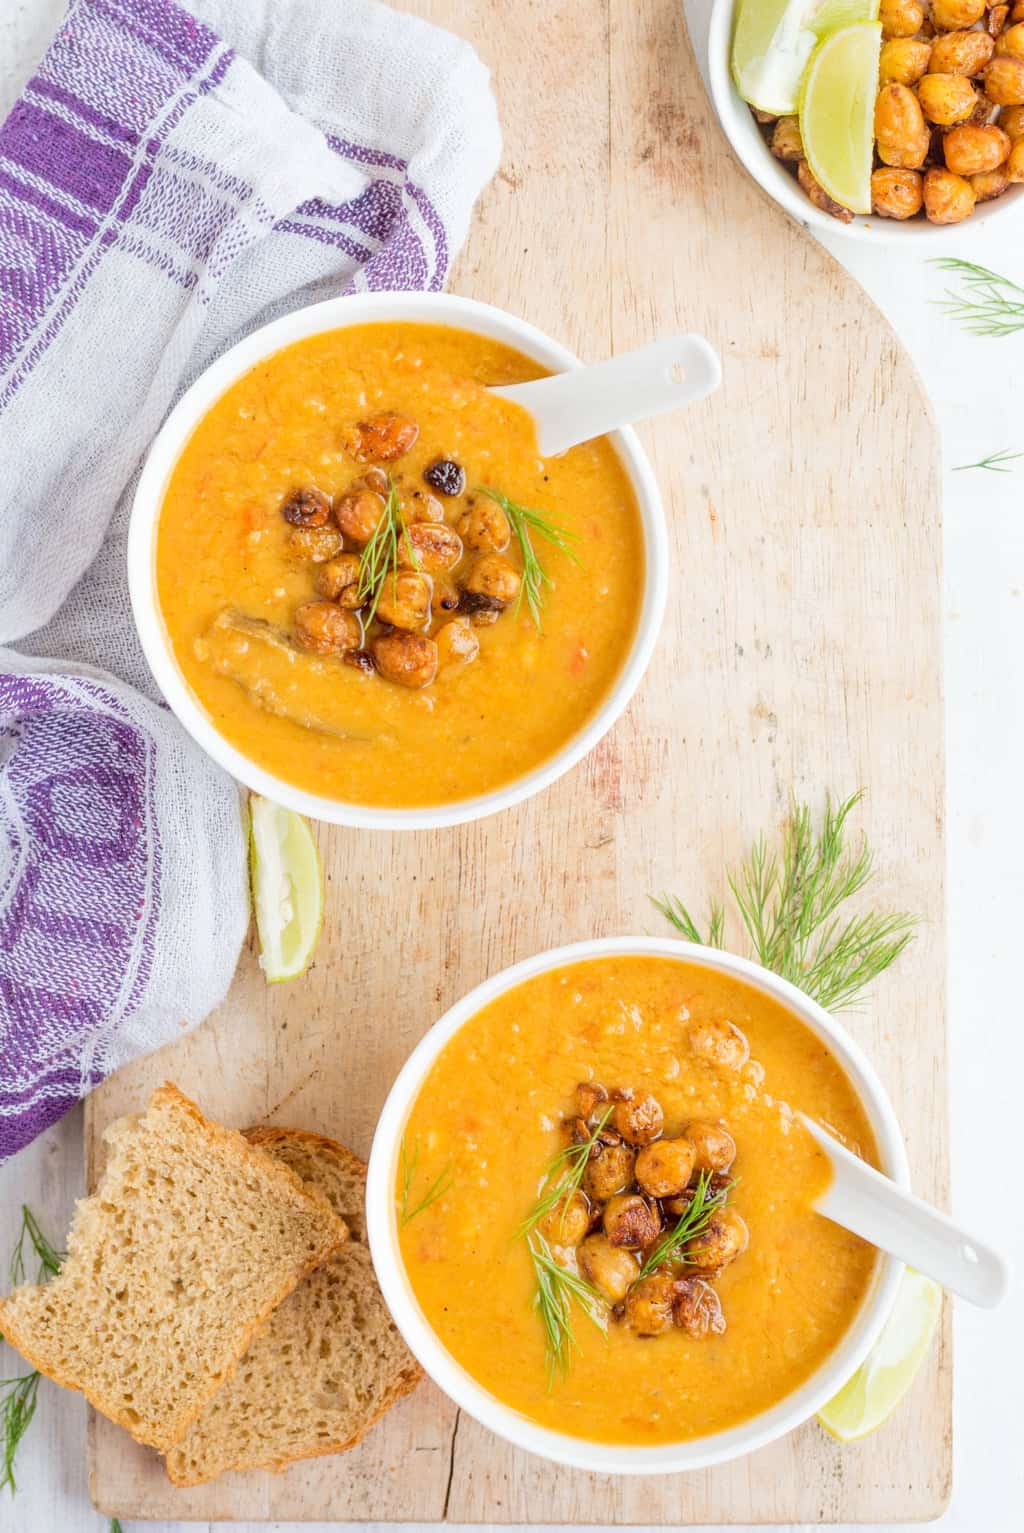 Curried Red Lentil Soup with Coconut Milk is creamy with a subtle curry flavour. This soup is rich in protein, healthy and nutritious.